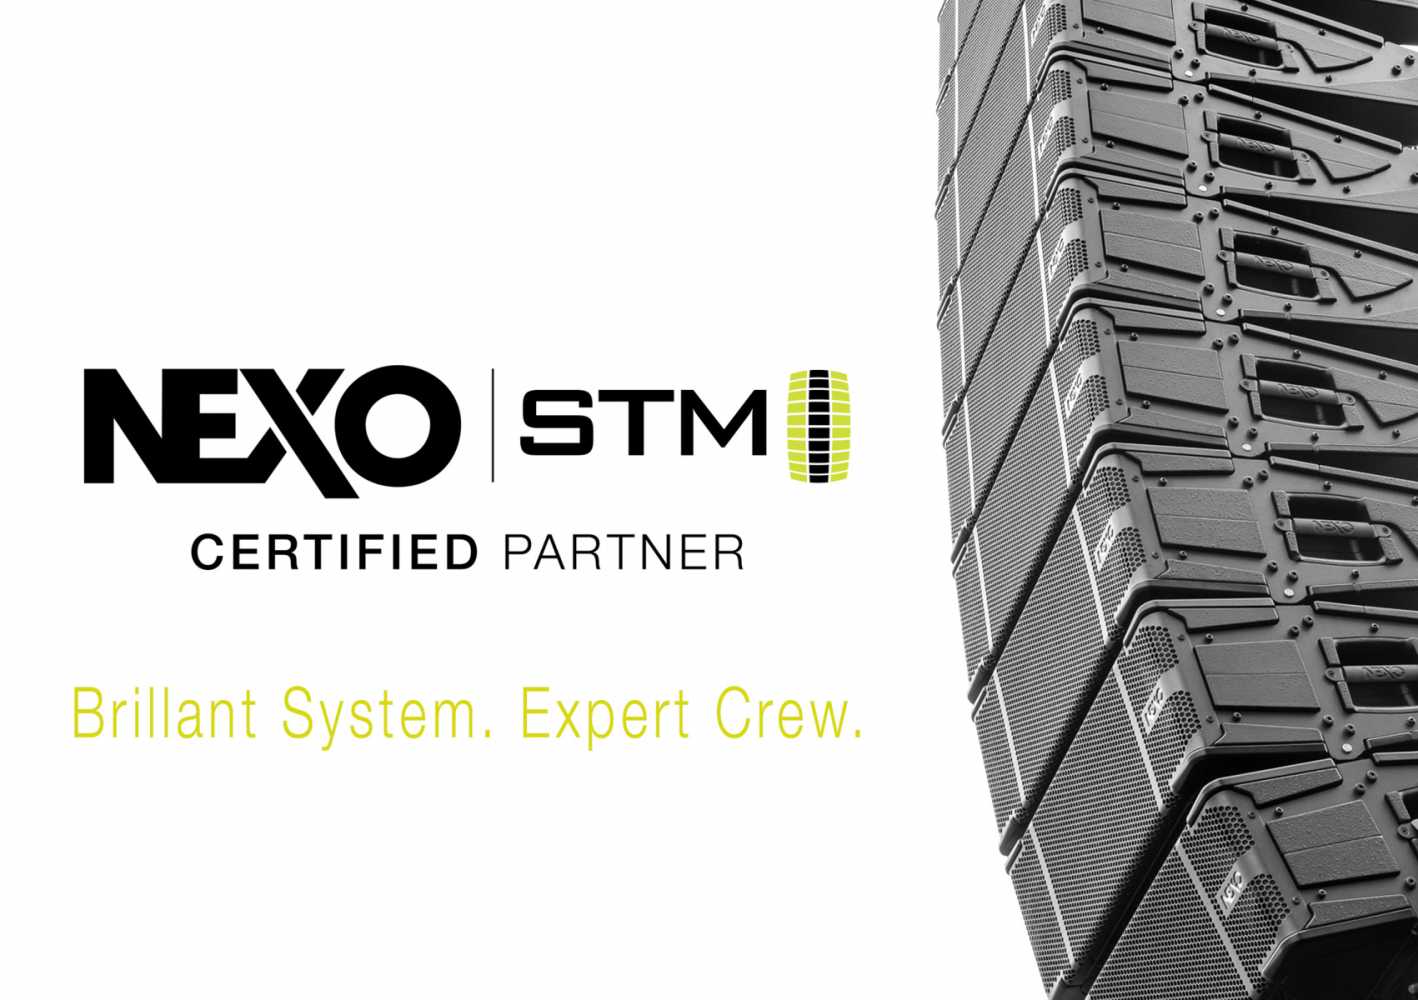 Nexo’s new Partner Network will bring STM owners and users closer together